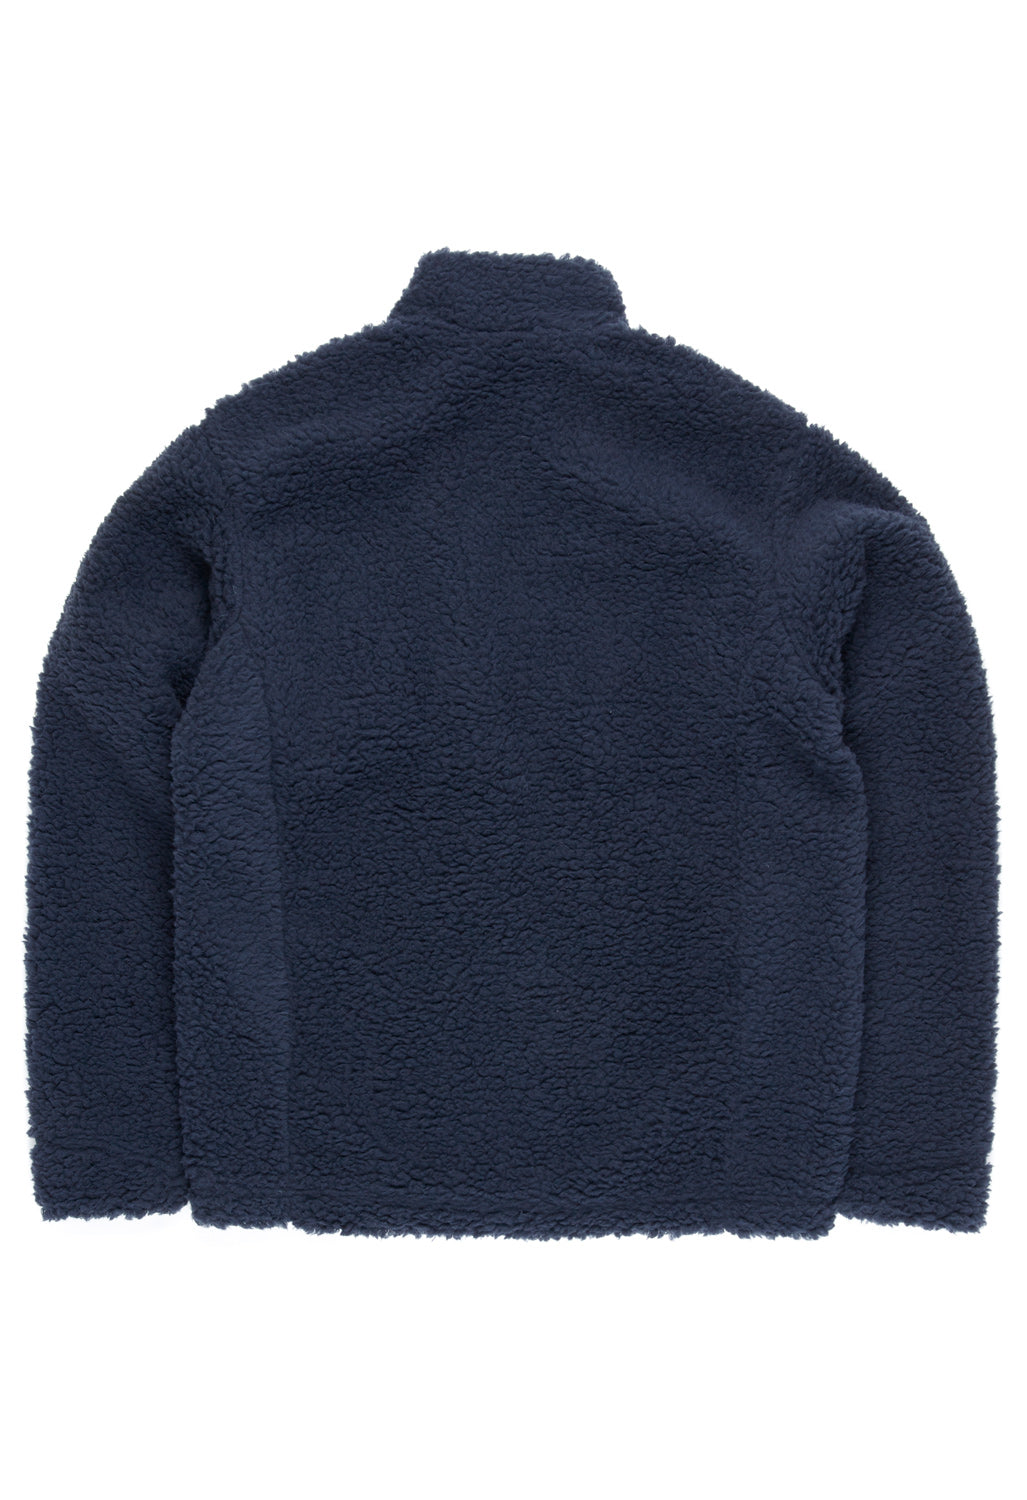 Montbell Men's Climaplus Shearling Jacket - Navy